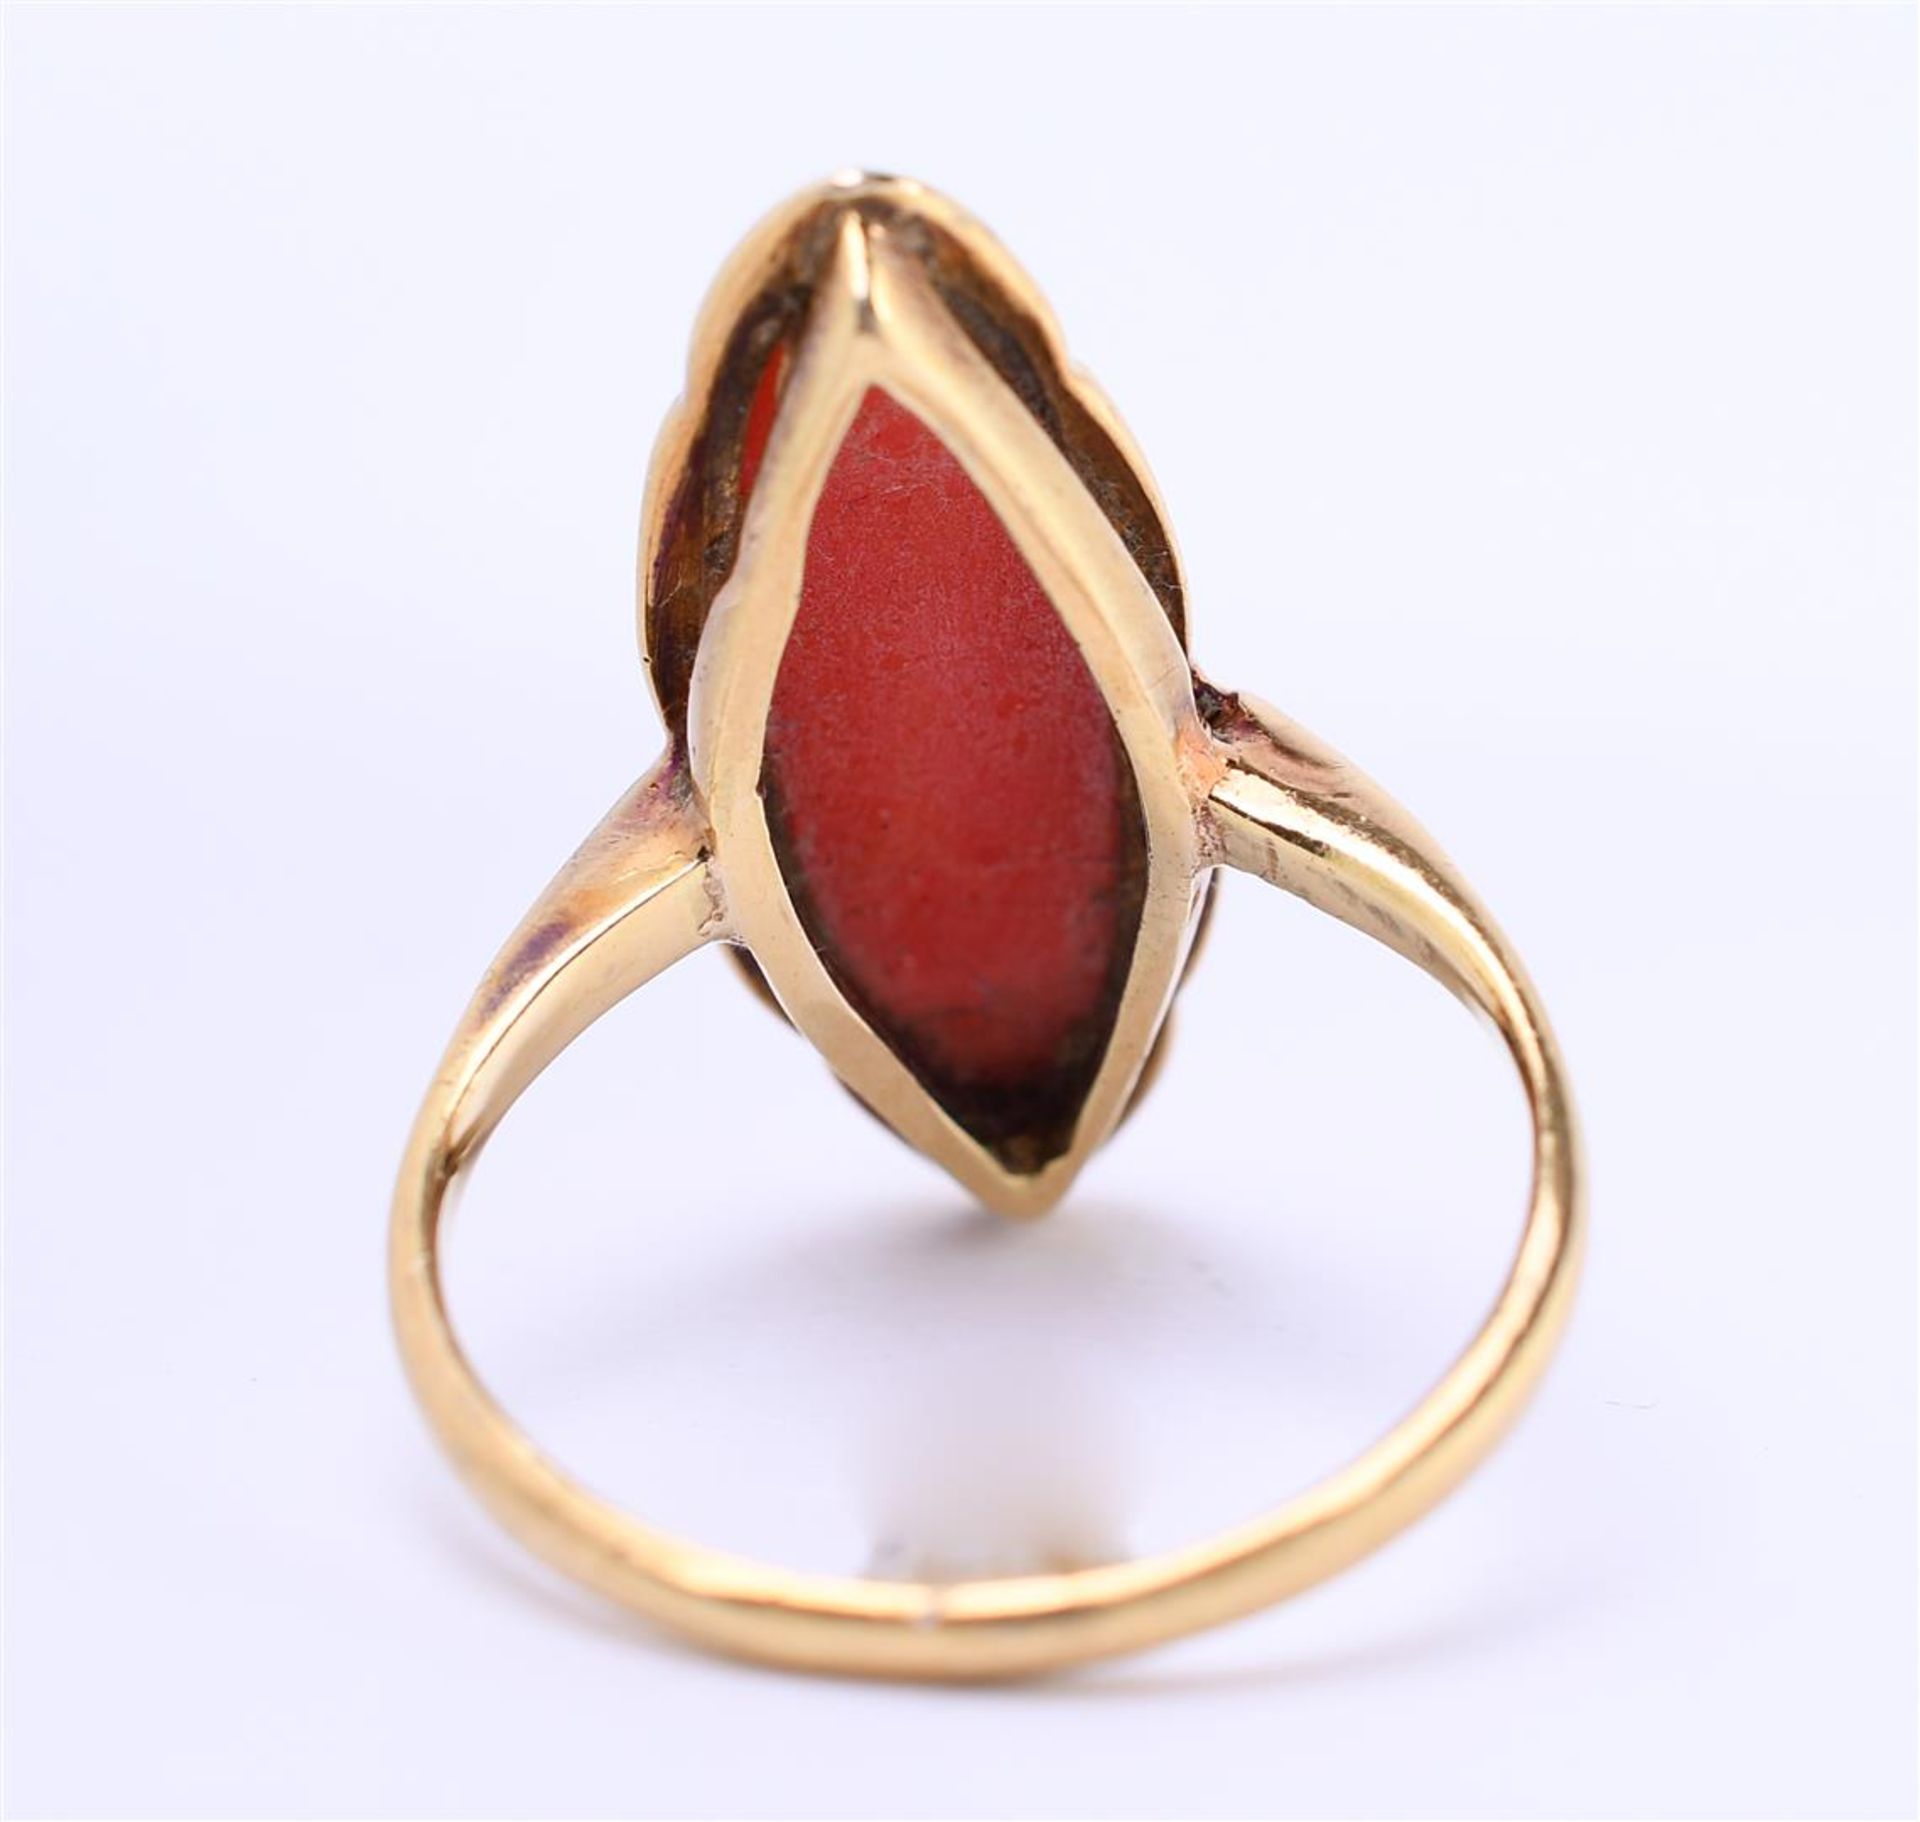 14 kt yellow gold scalloping set with marquise cut red coral. Ring size 50 / 16 mm - Image 3 of 4